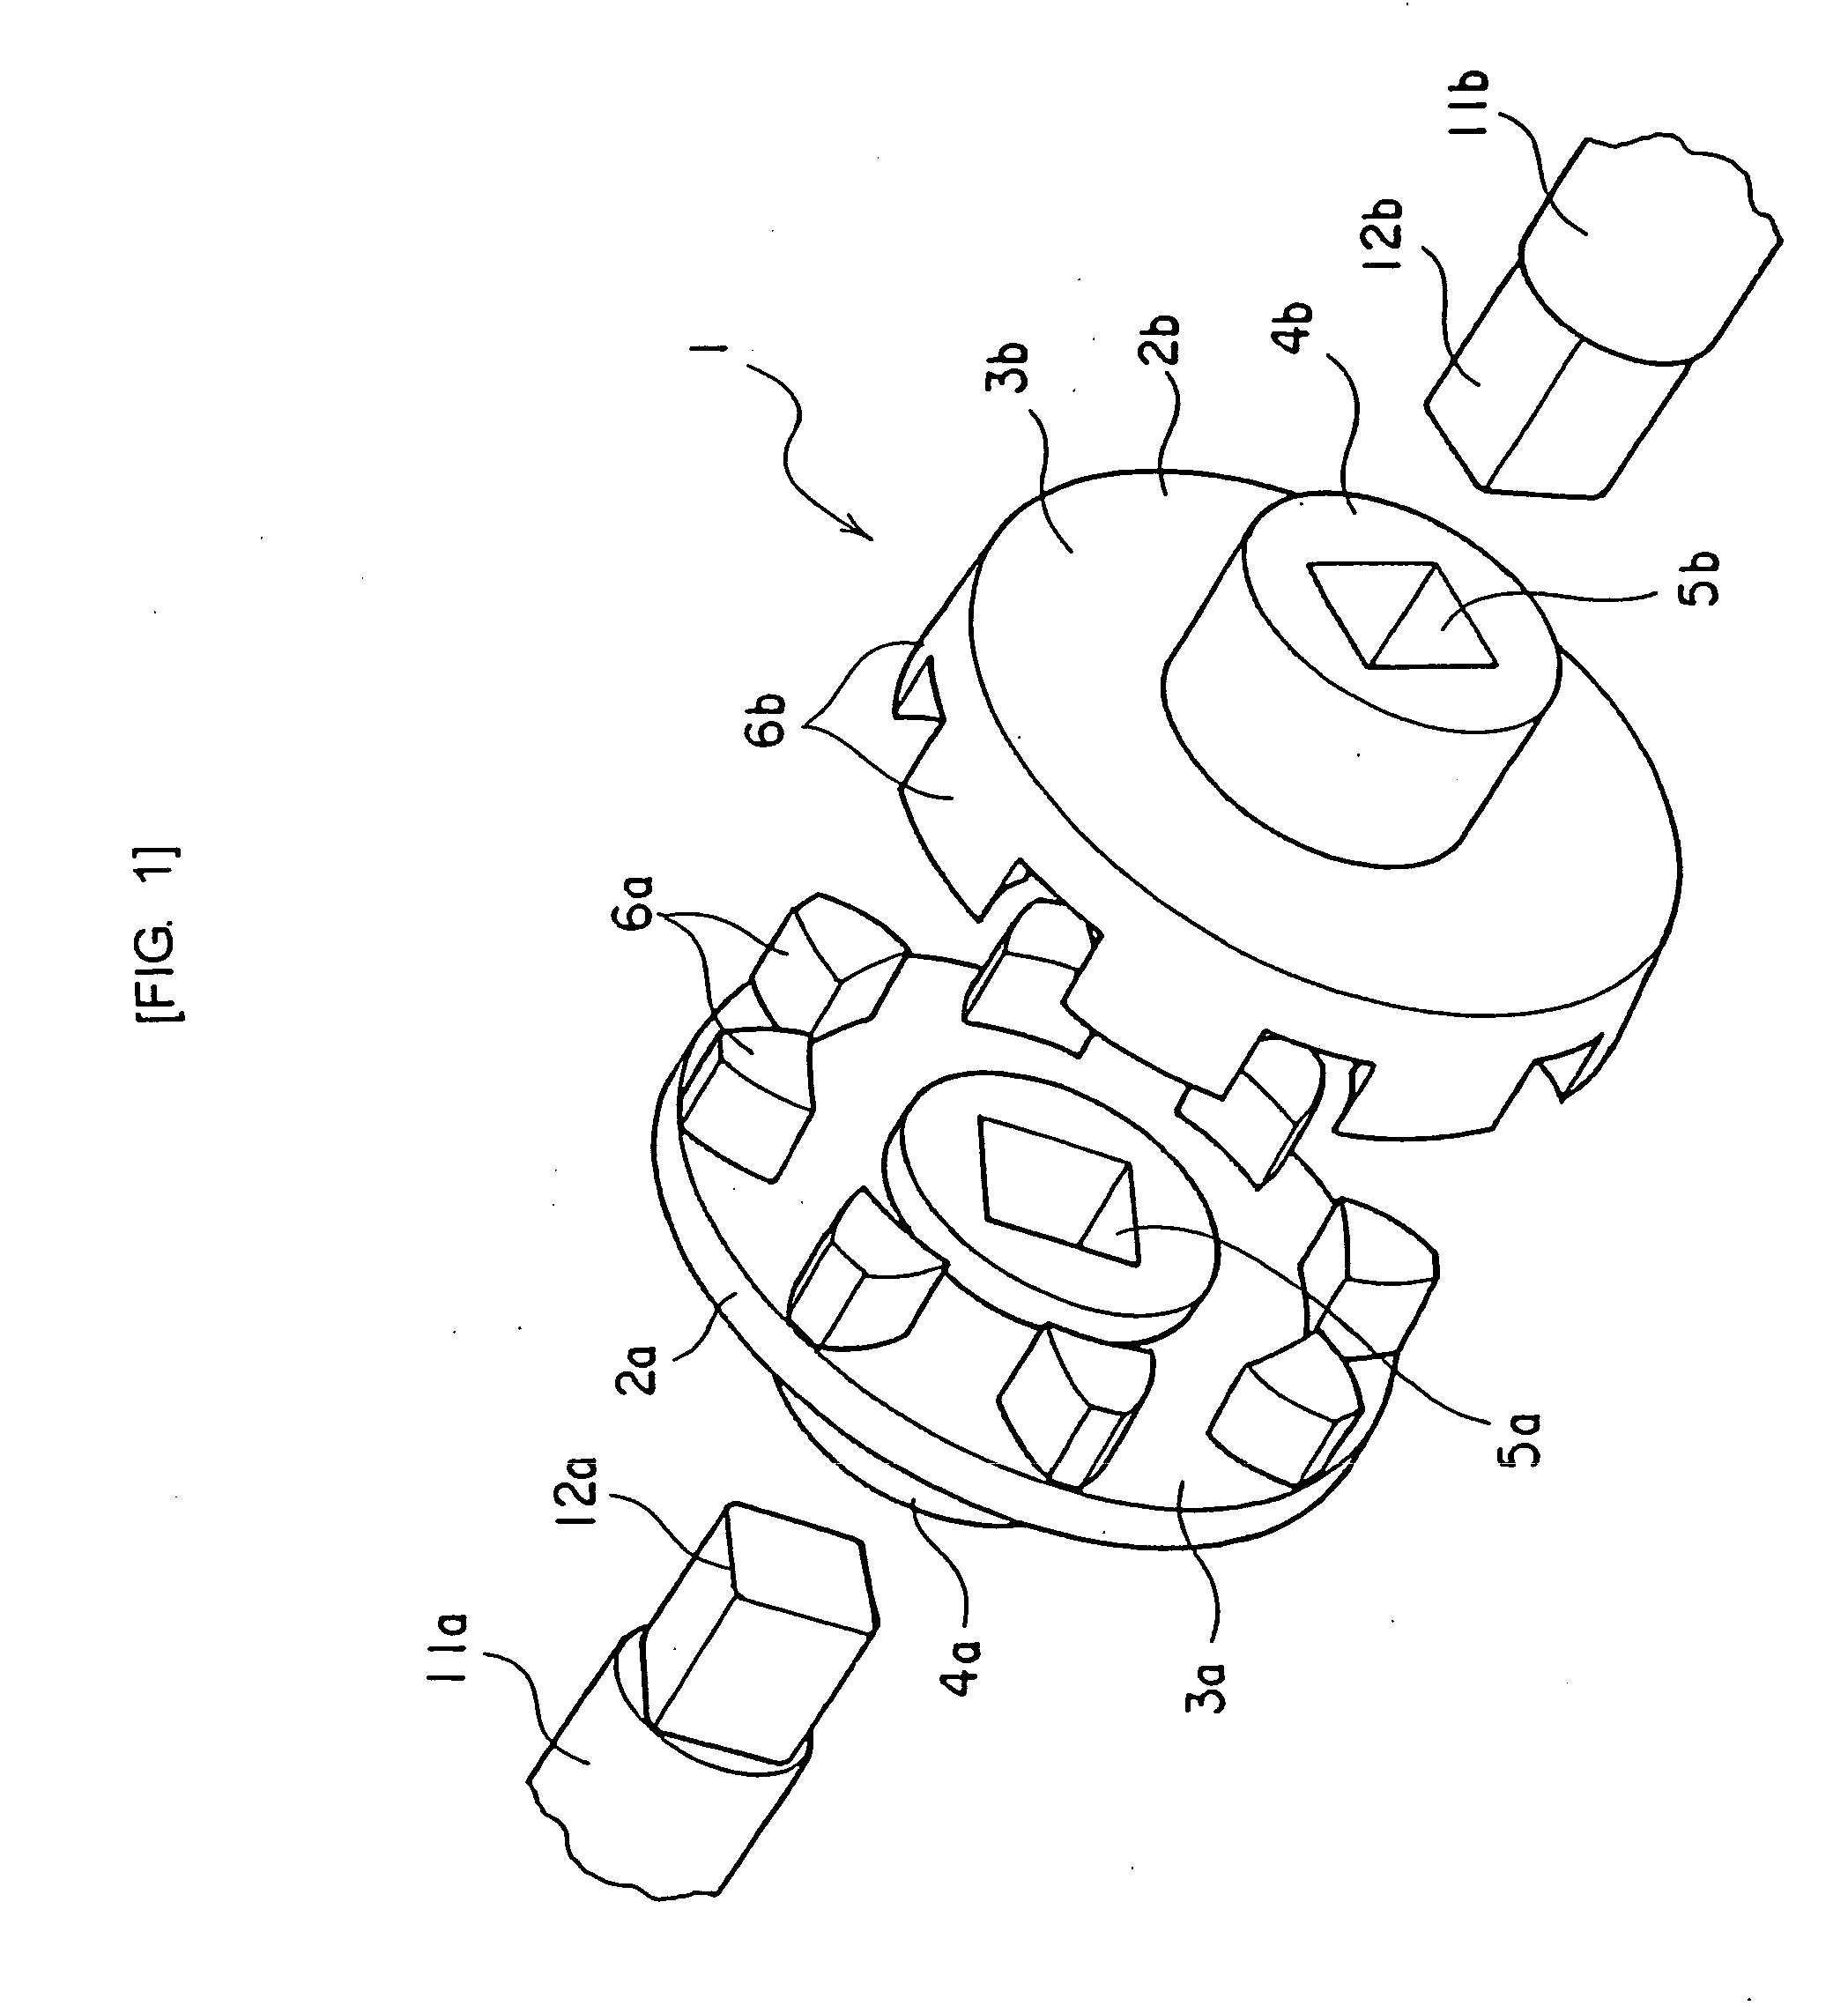 Rotary shaft coupling